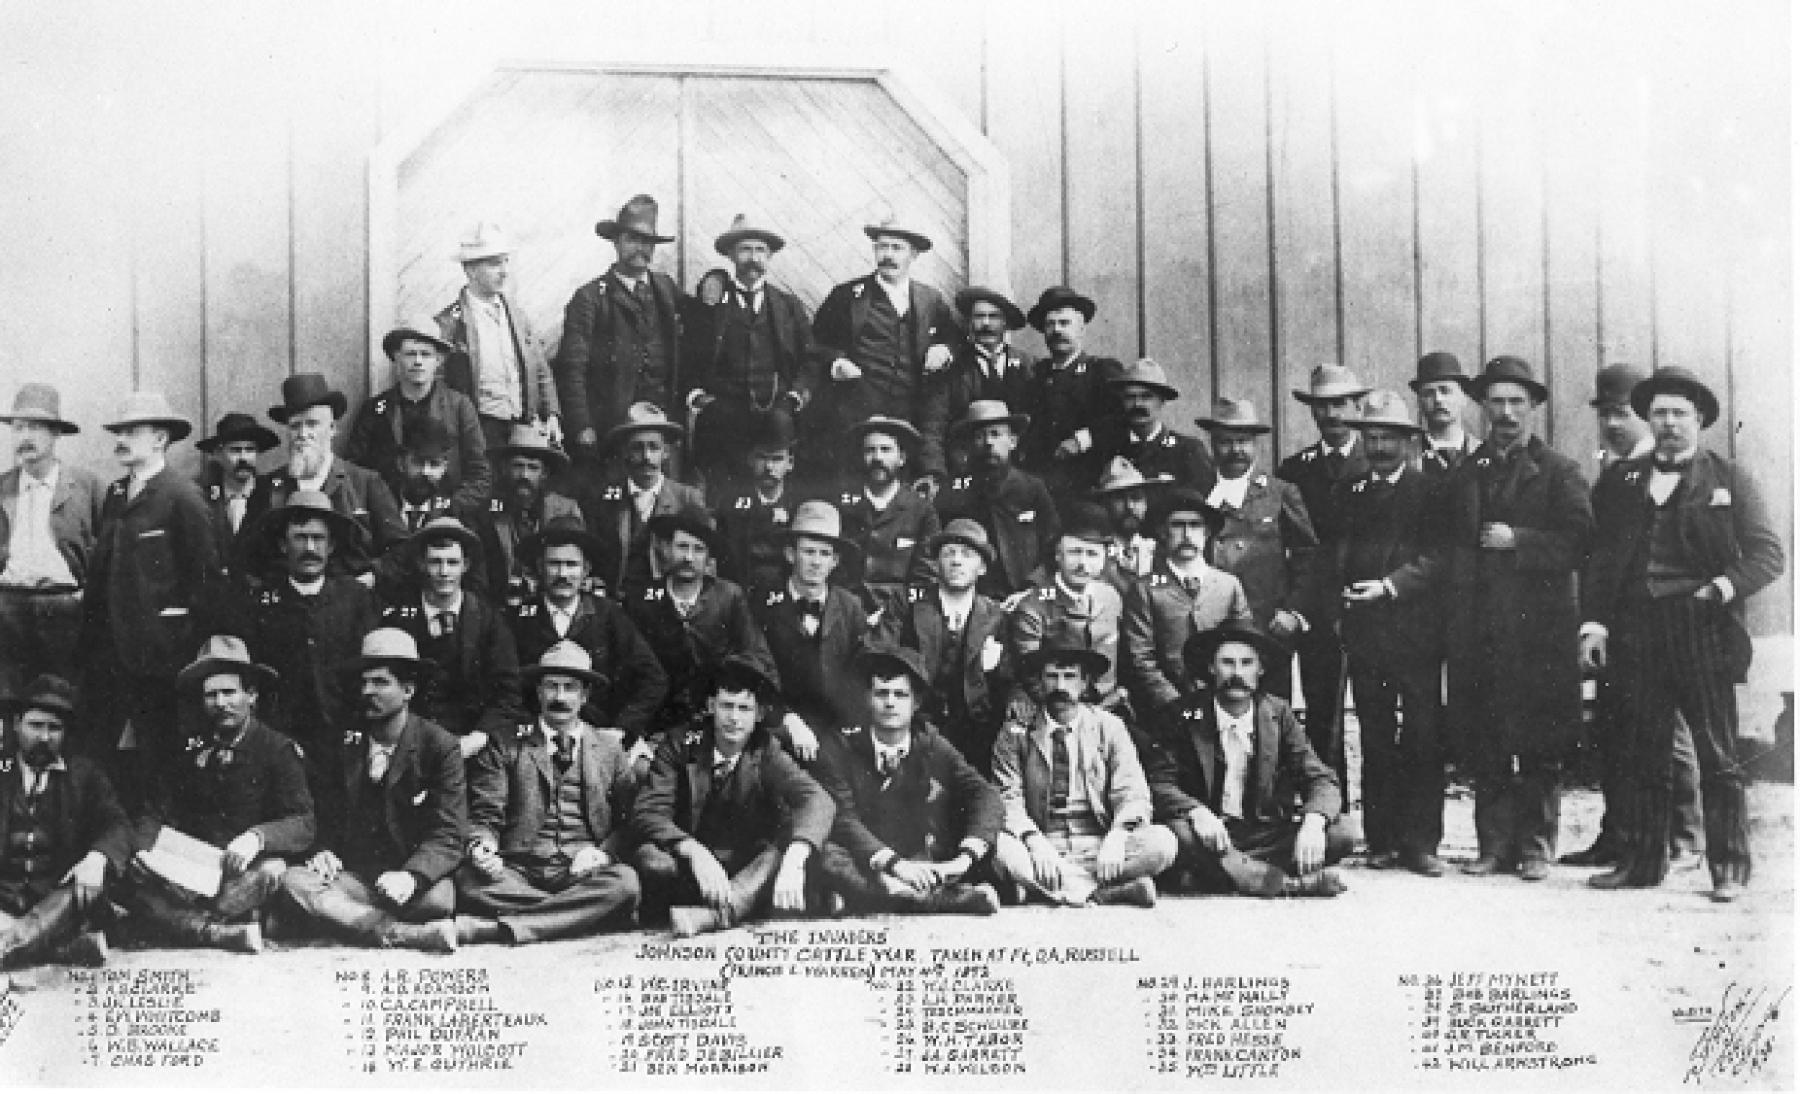 The invaders of Johnson County, in custody at Fort D.A. Russell outside Cheyenne, May 1892. Frank Canton is No. 34, seated at the right-hand end of the second row. Canton's and expedition leader Frank Wolcott’s insistence that the group detour to the KC Ranch to kill Nate Champion led to delays that spelled failure for the expedition’s main goals. They had planned to murder dozens more people in Johnson County. Wikipedia.